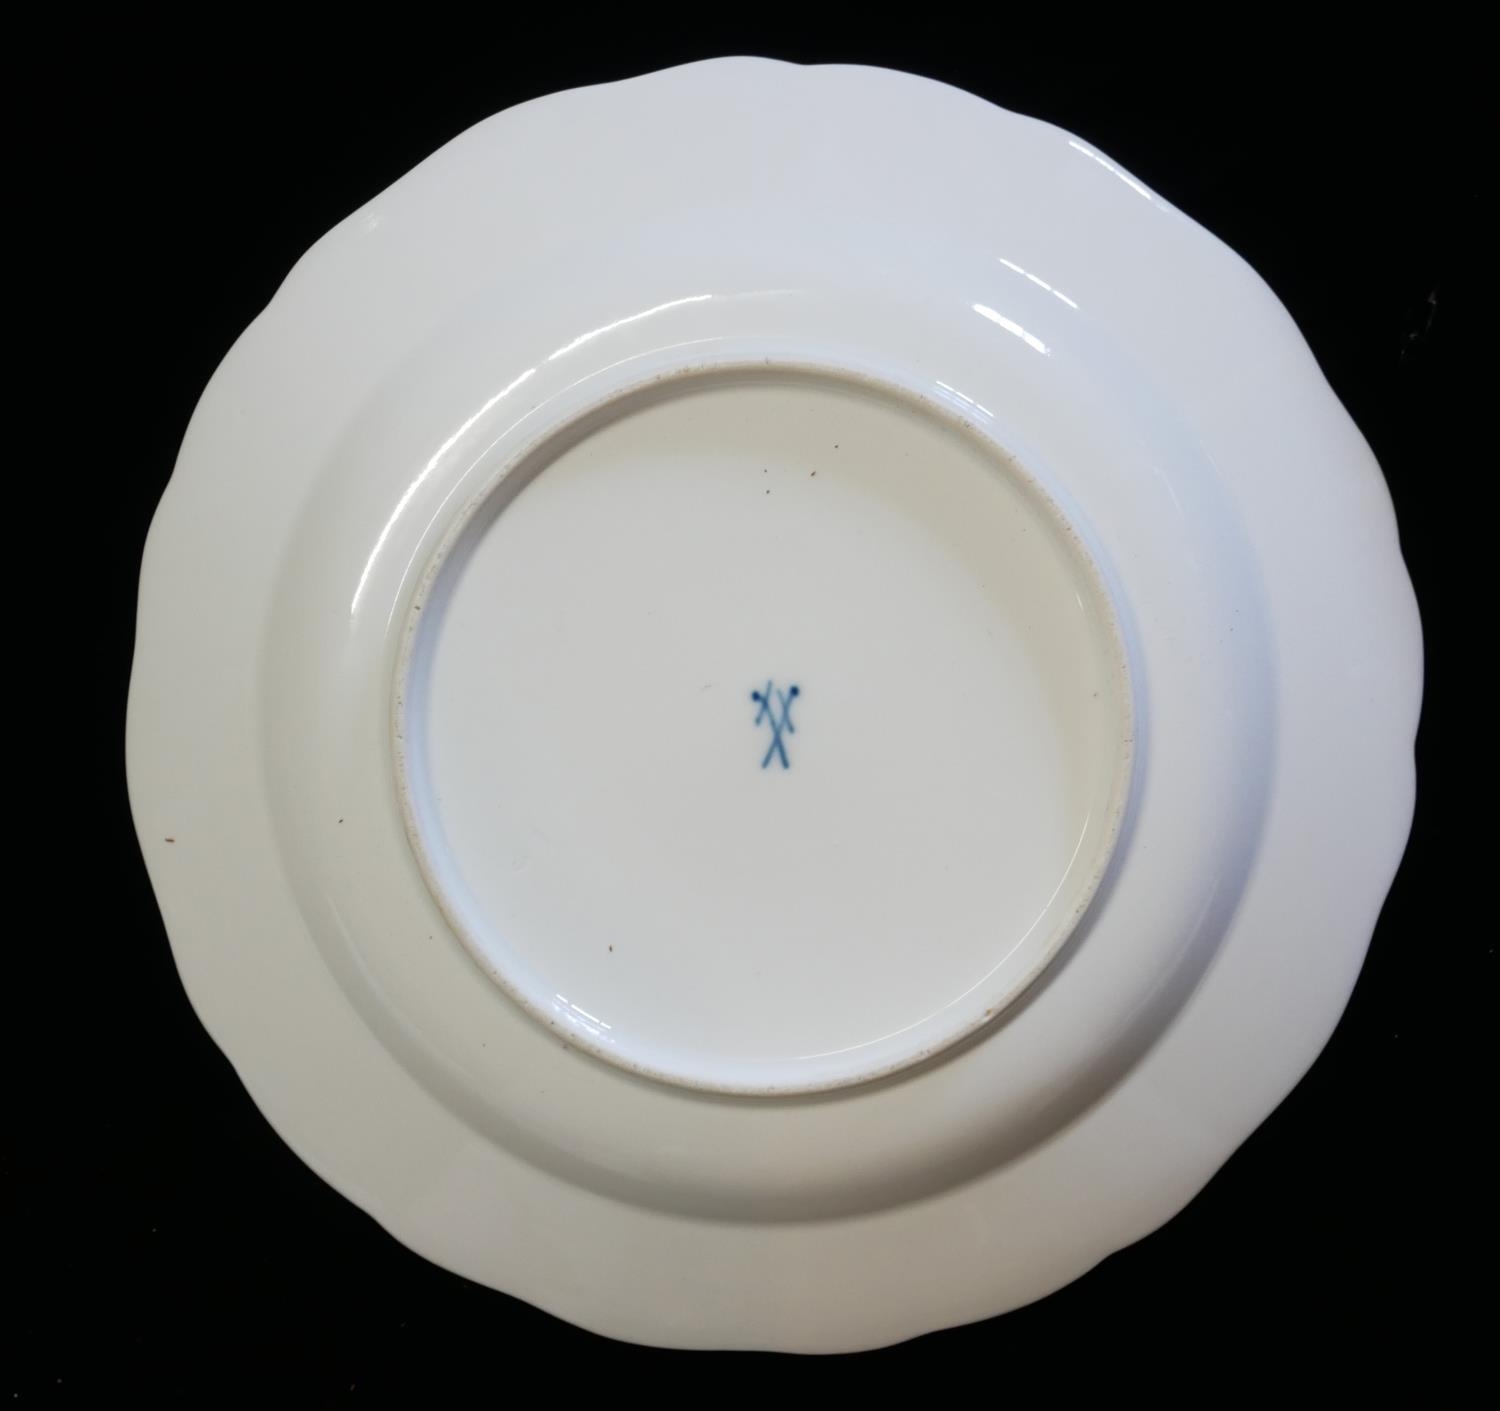 MESSIEN, A SET OF SIX EARLY 20TH CENTURY PORCELAIN DINNER PLATES AND MATCHING SERVING BOWL Having - Image 9 of 11